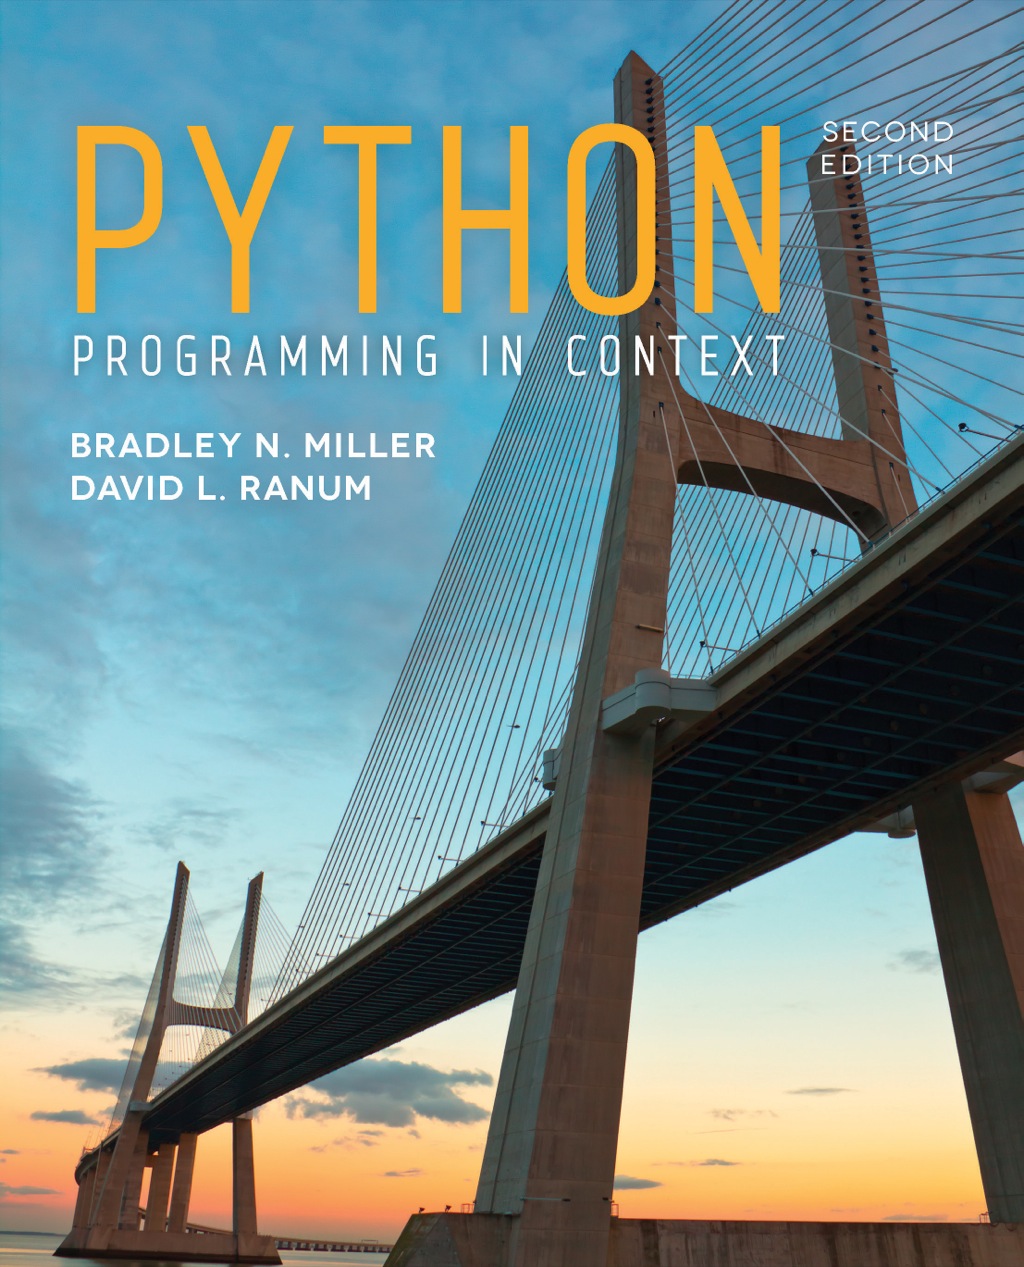 Python Programming in Context - 2nd Edition (eBook Rental)